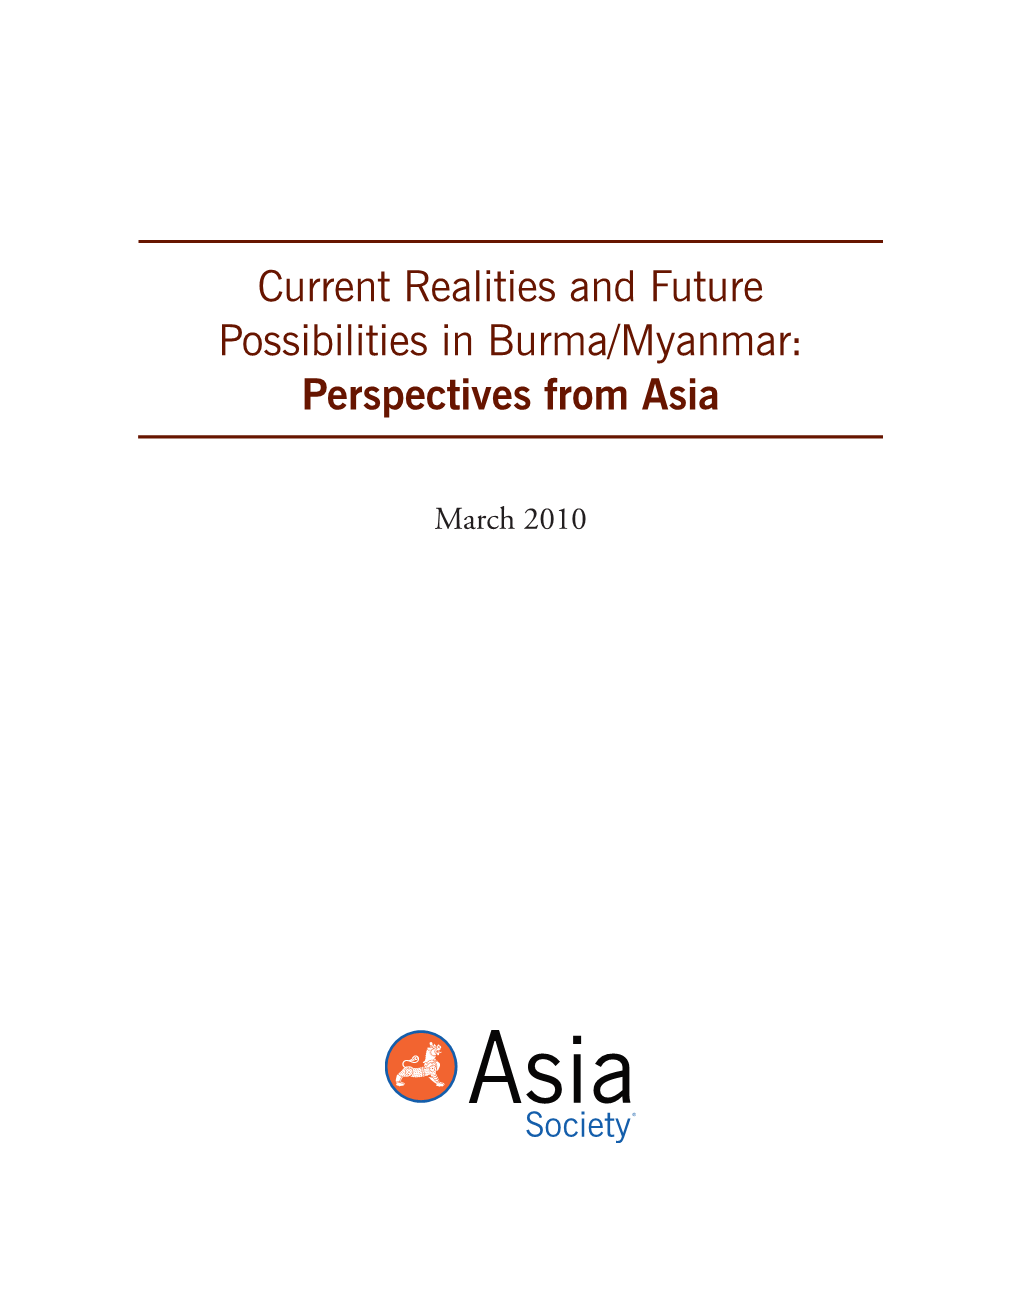 Current Realities and Future Possibilities in Burma/Myanmar: Perspectives from Asia